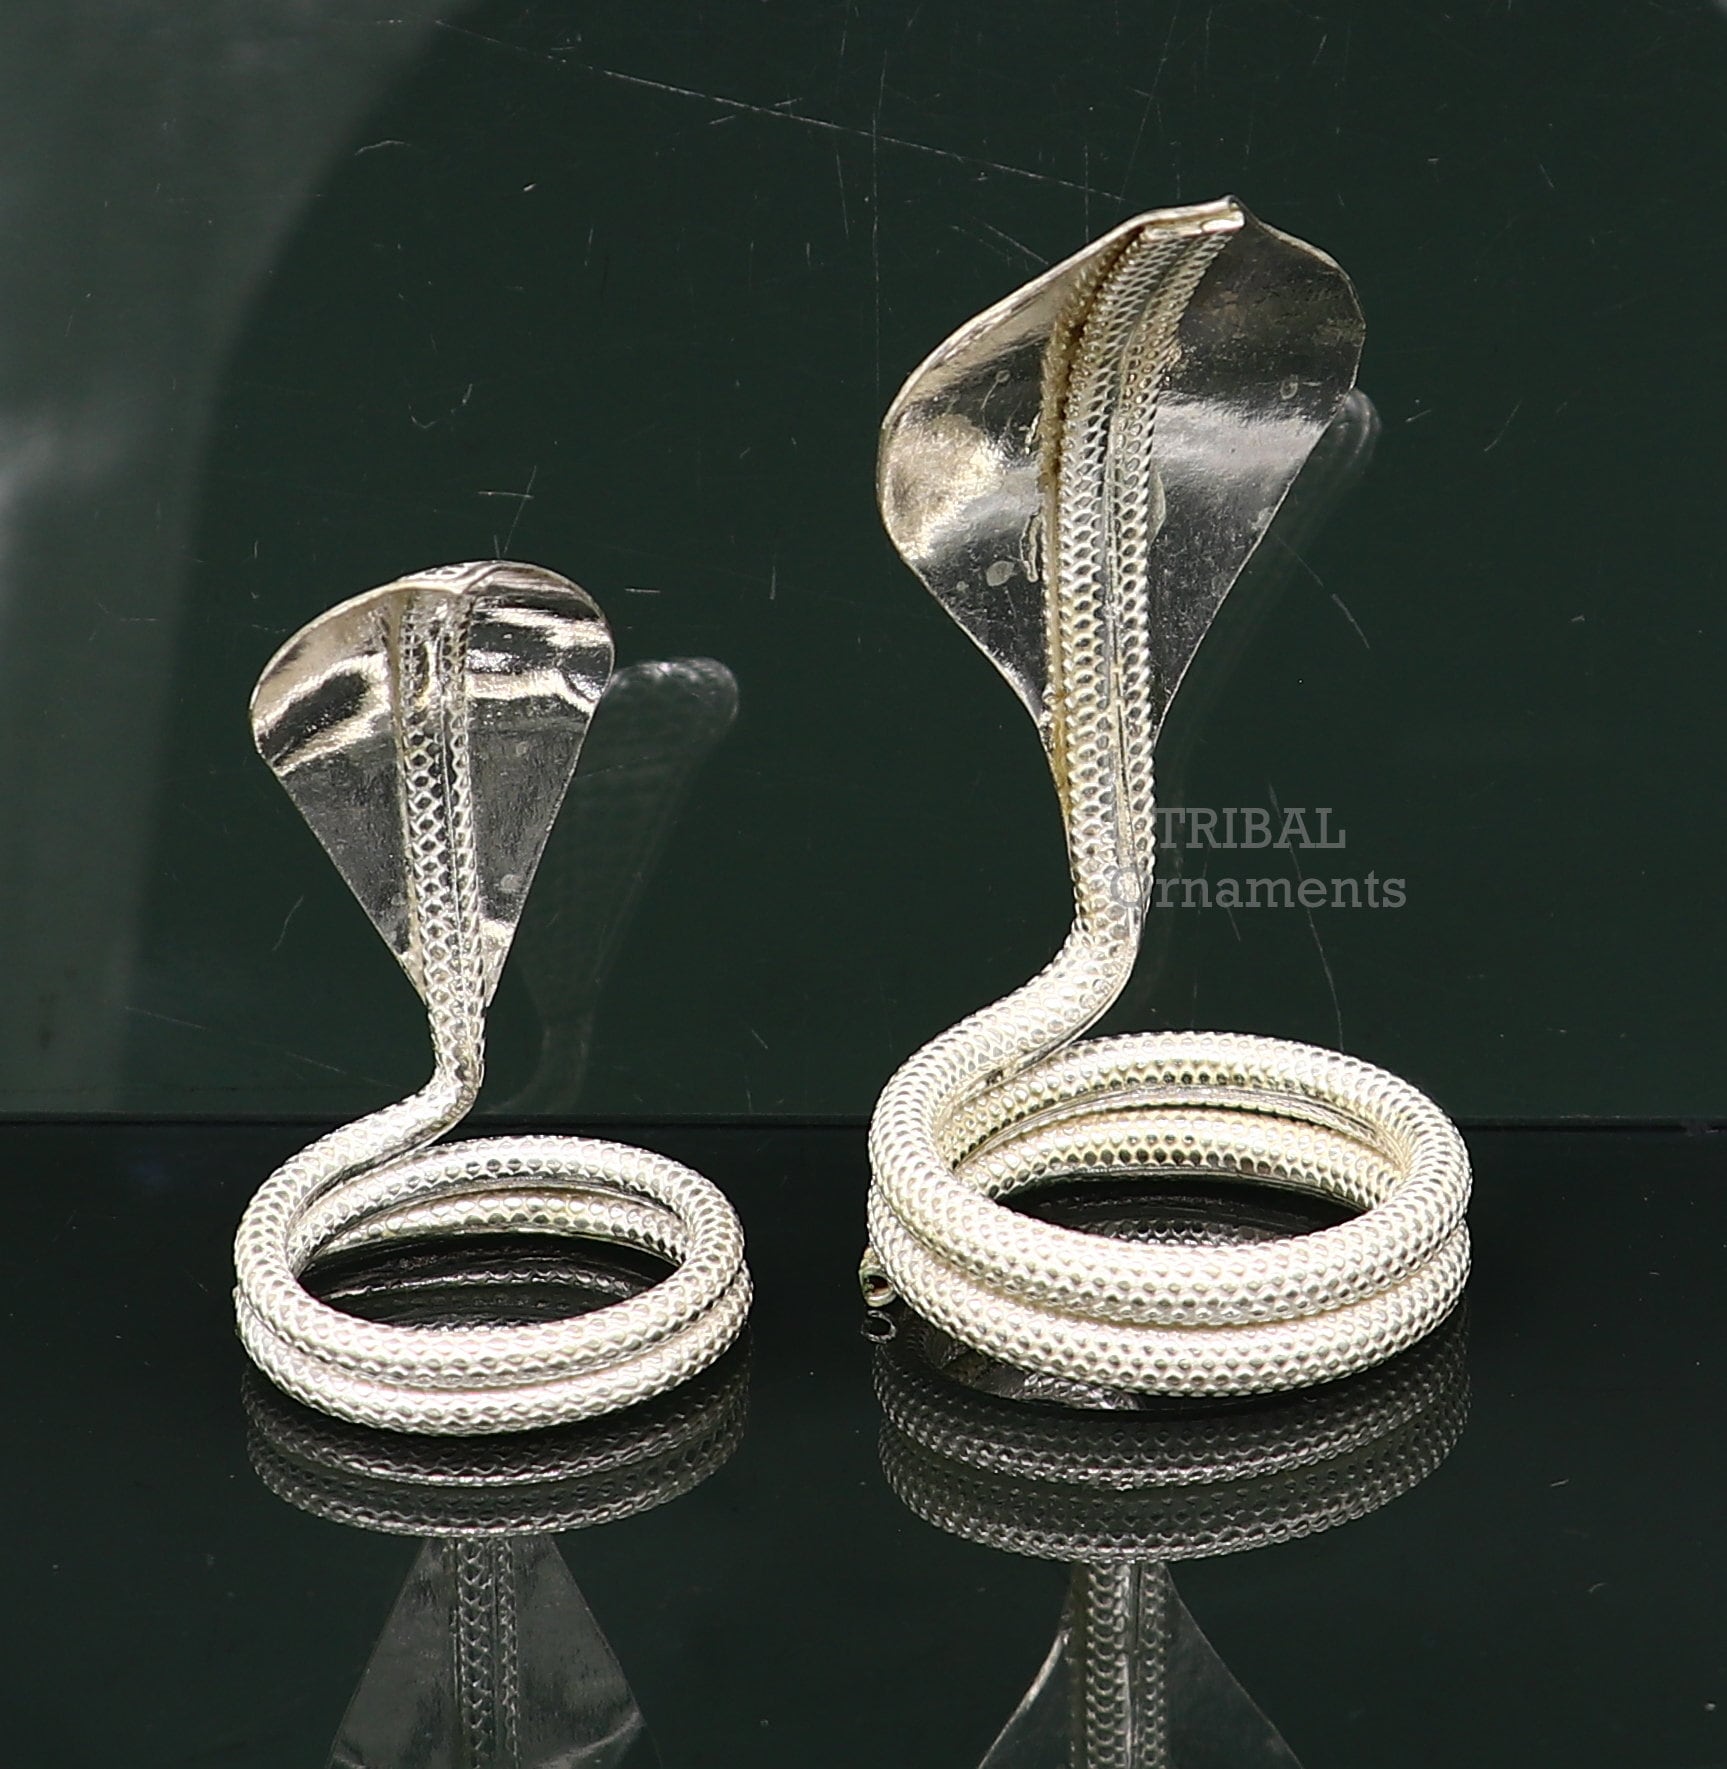 Handmade sterling silver fabulous vintage antique mini snake or shiva snake for puja or worshipping, solid nag nagin puja article su756 - TRIBAL ORNAMENTS